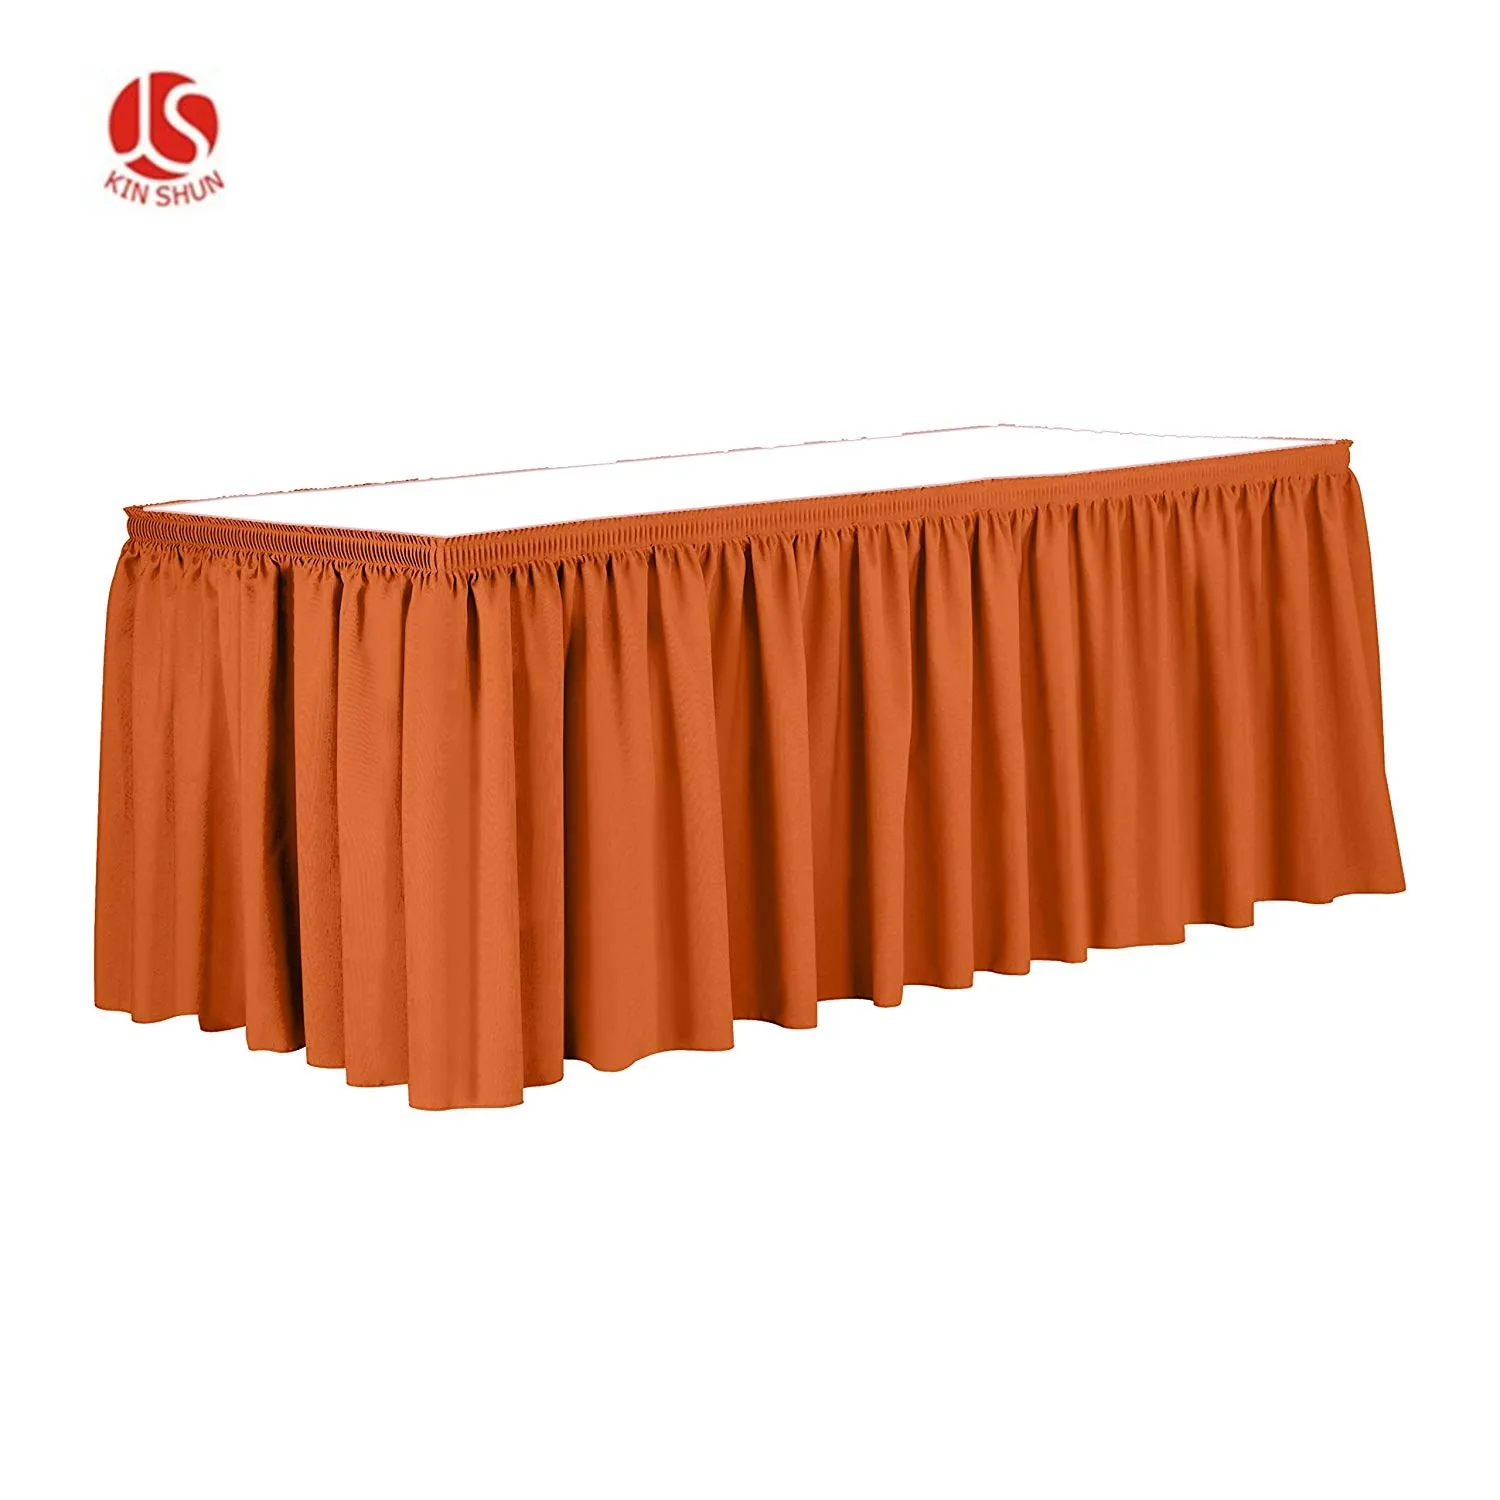 Table Skirting Designs - Ideas for Decorating Wedding Reception Tables